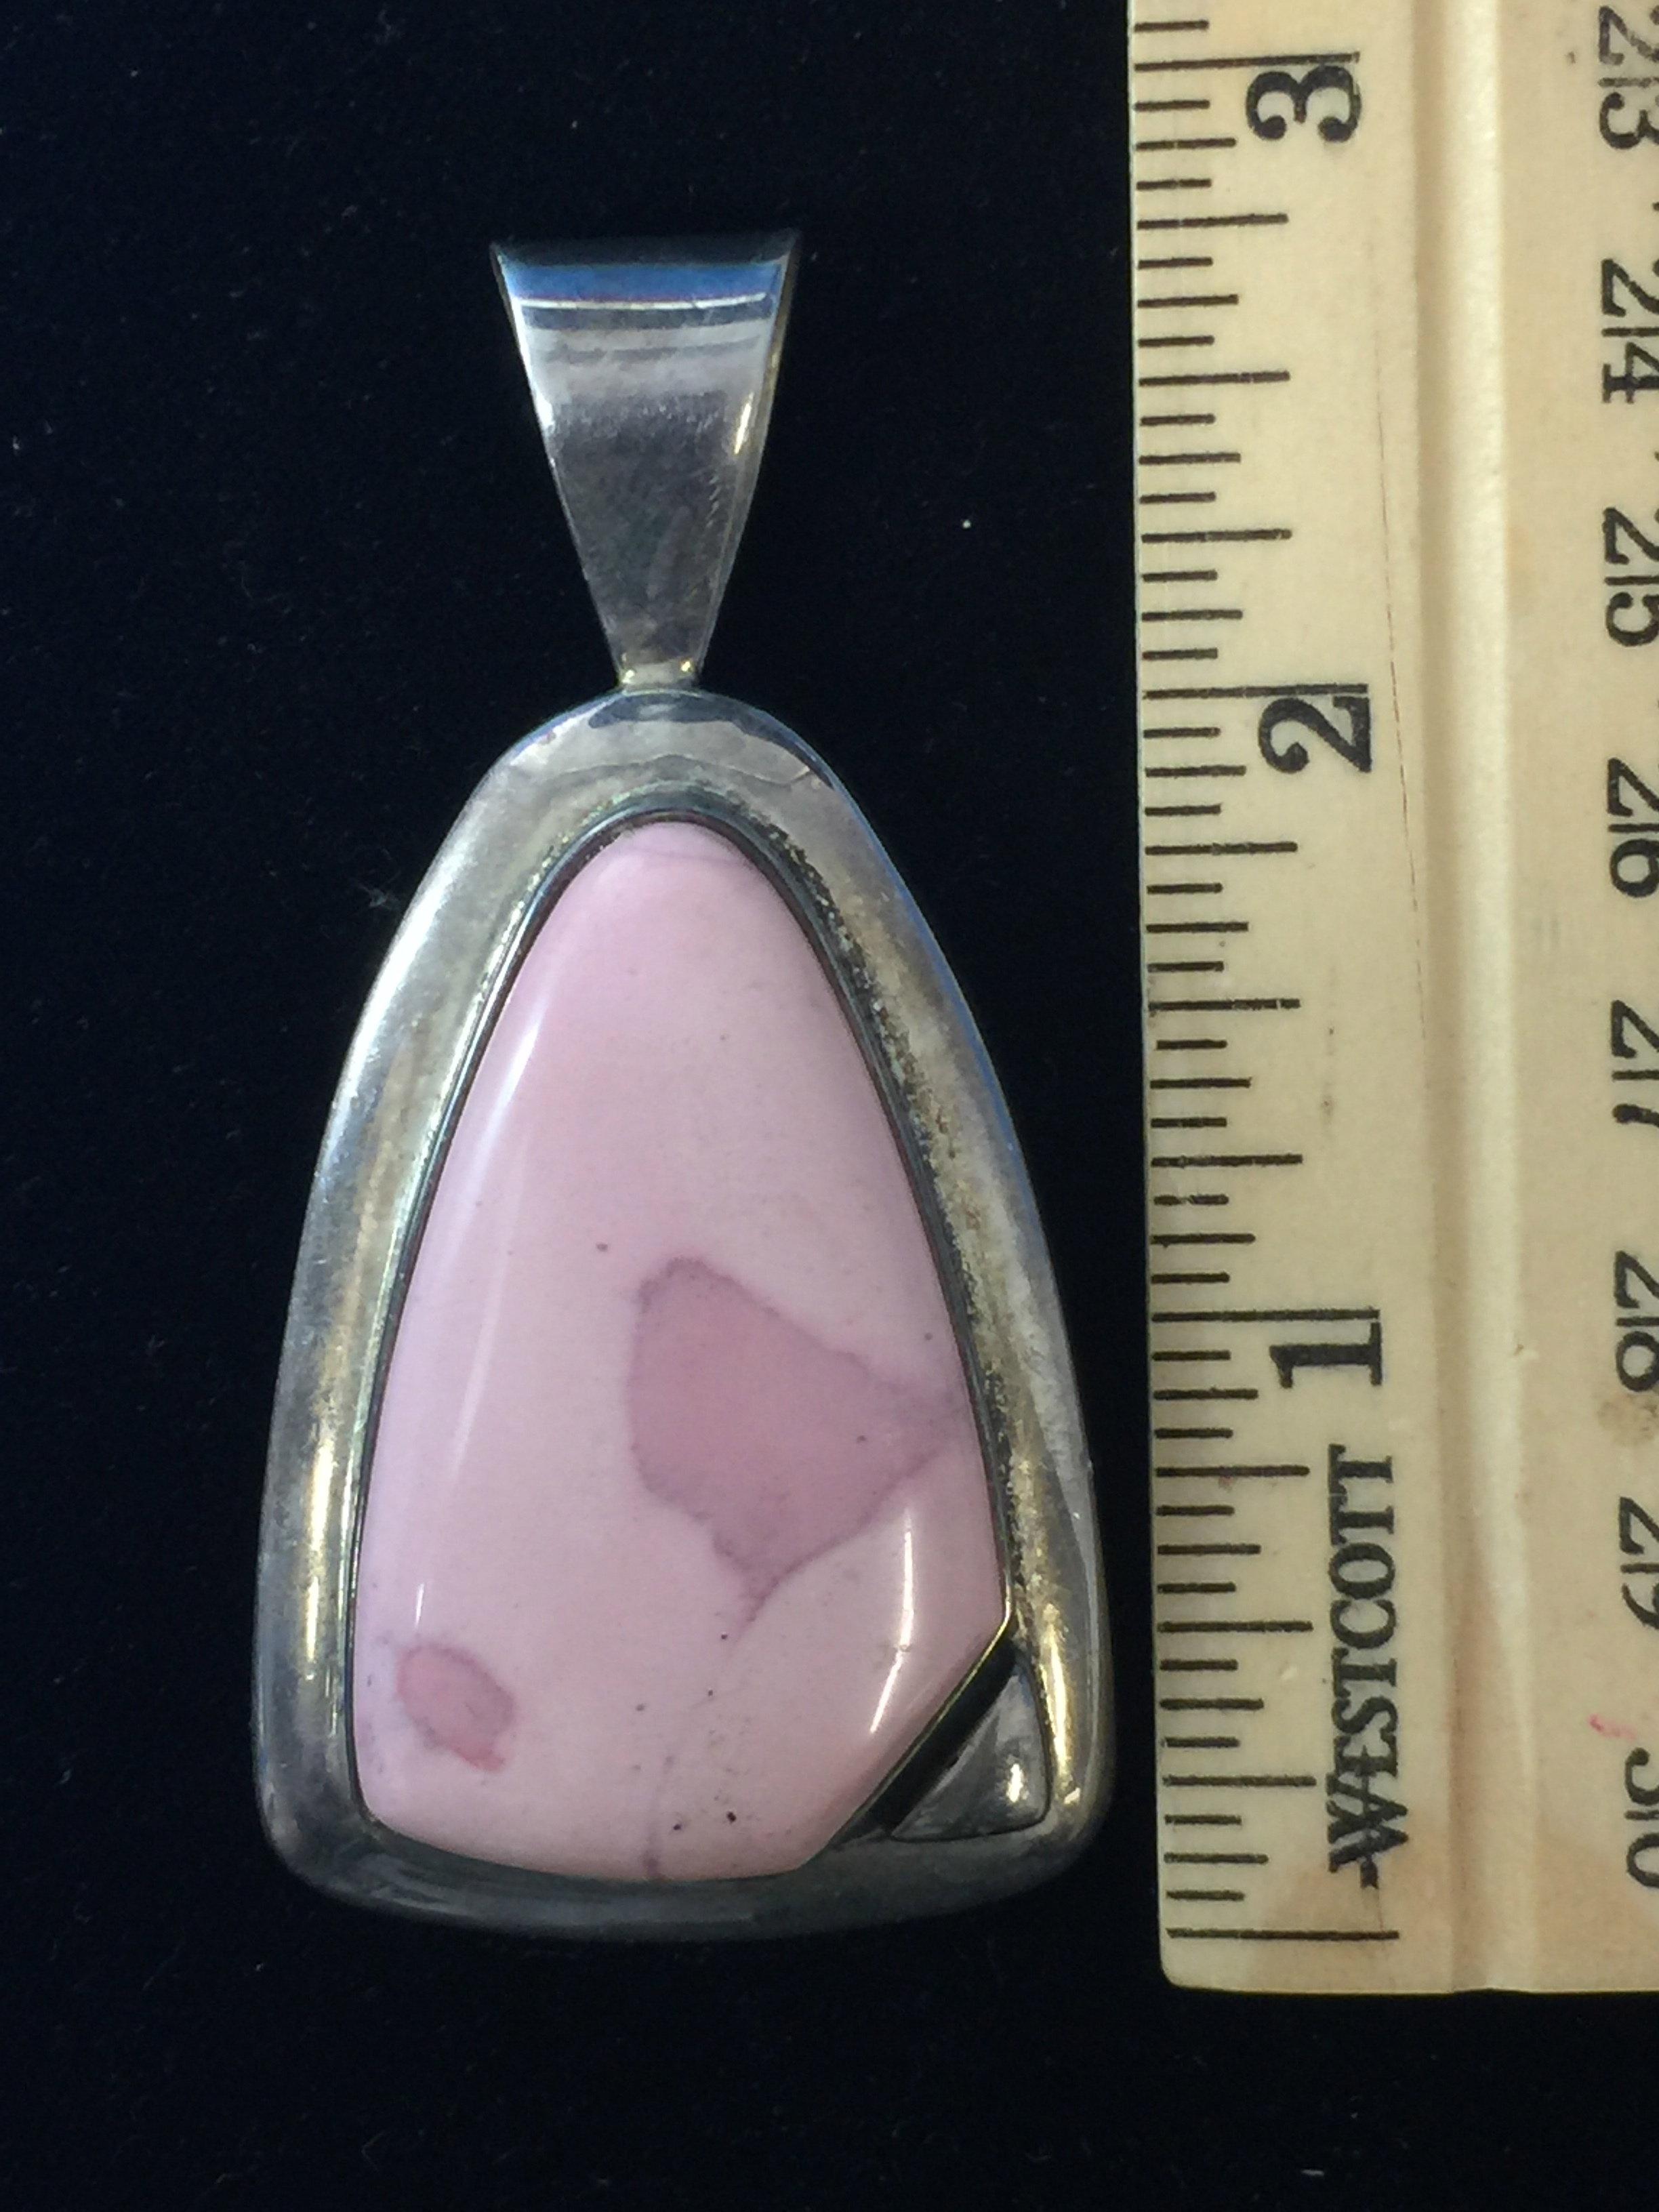 Amazing DTR Large Heavy Sterling Silver 2.5" Pendant W/ Pink Agate Stone